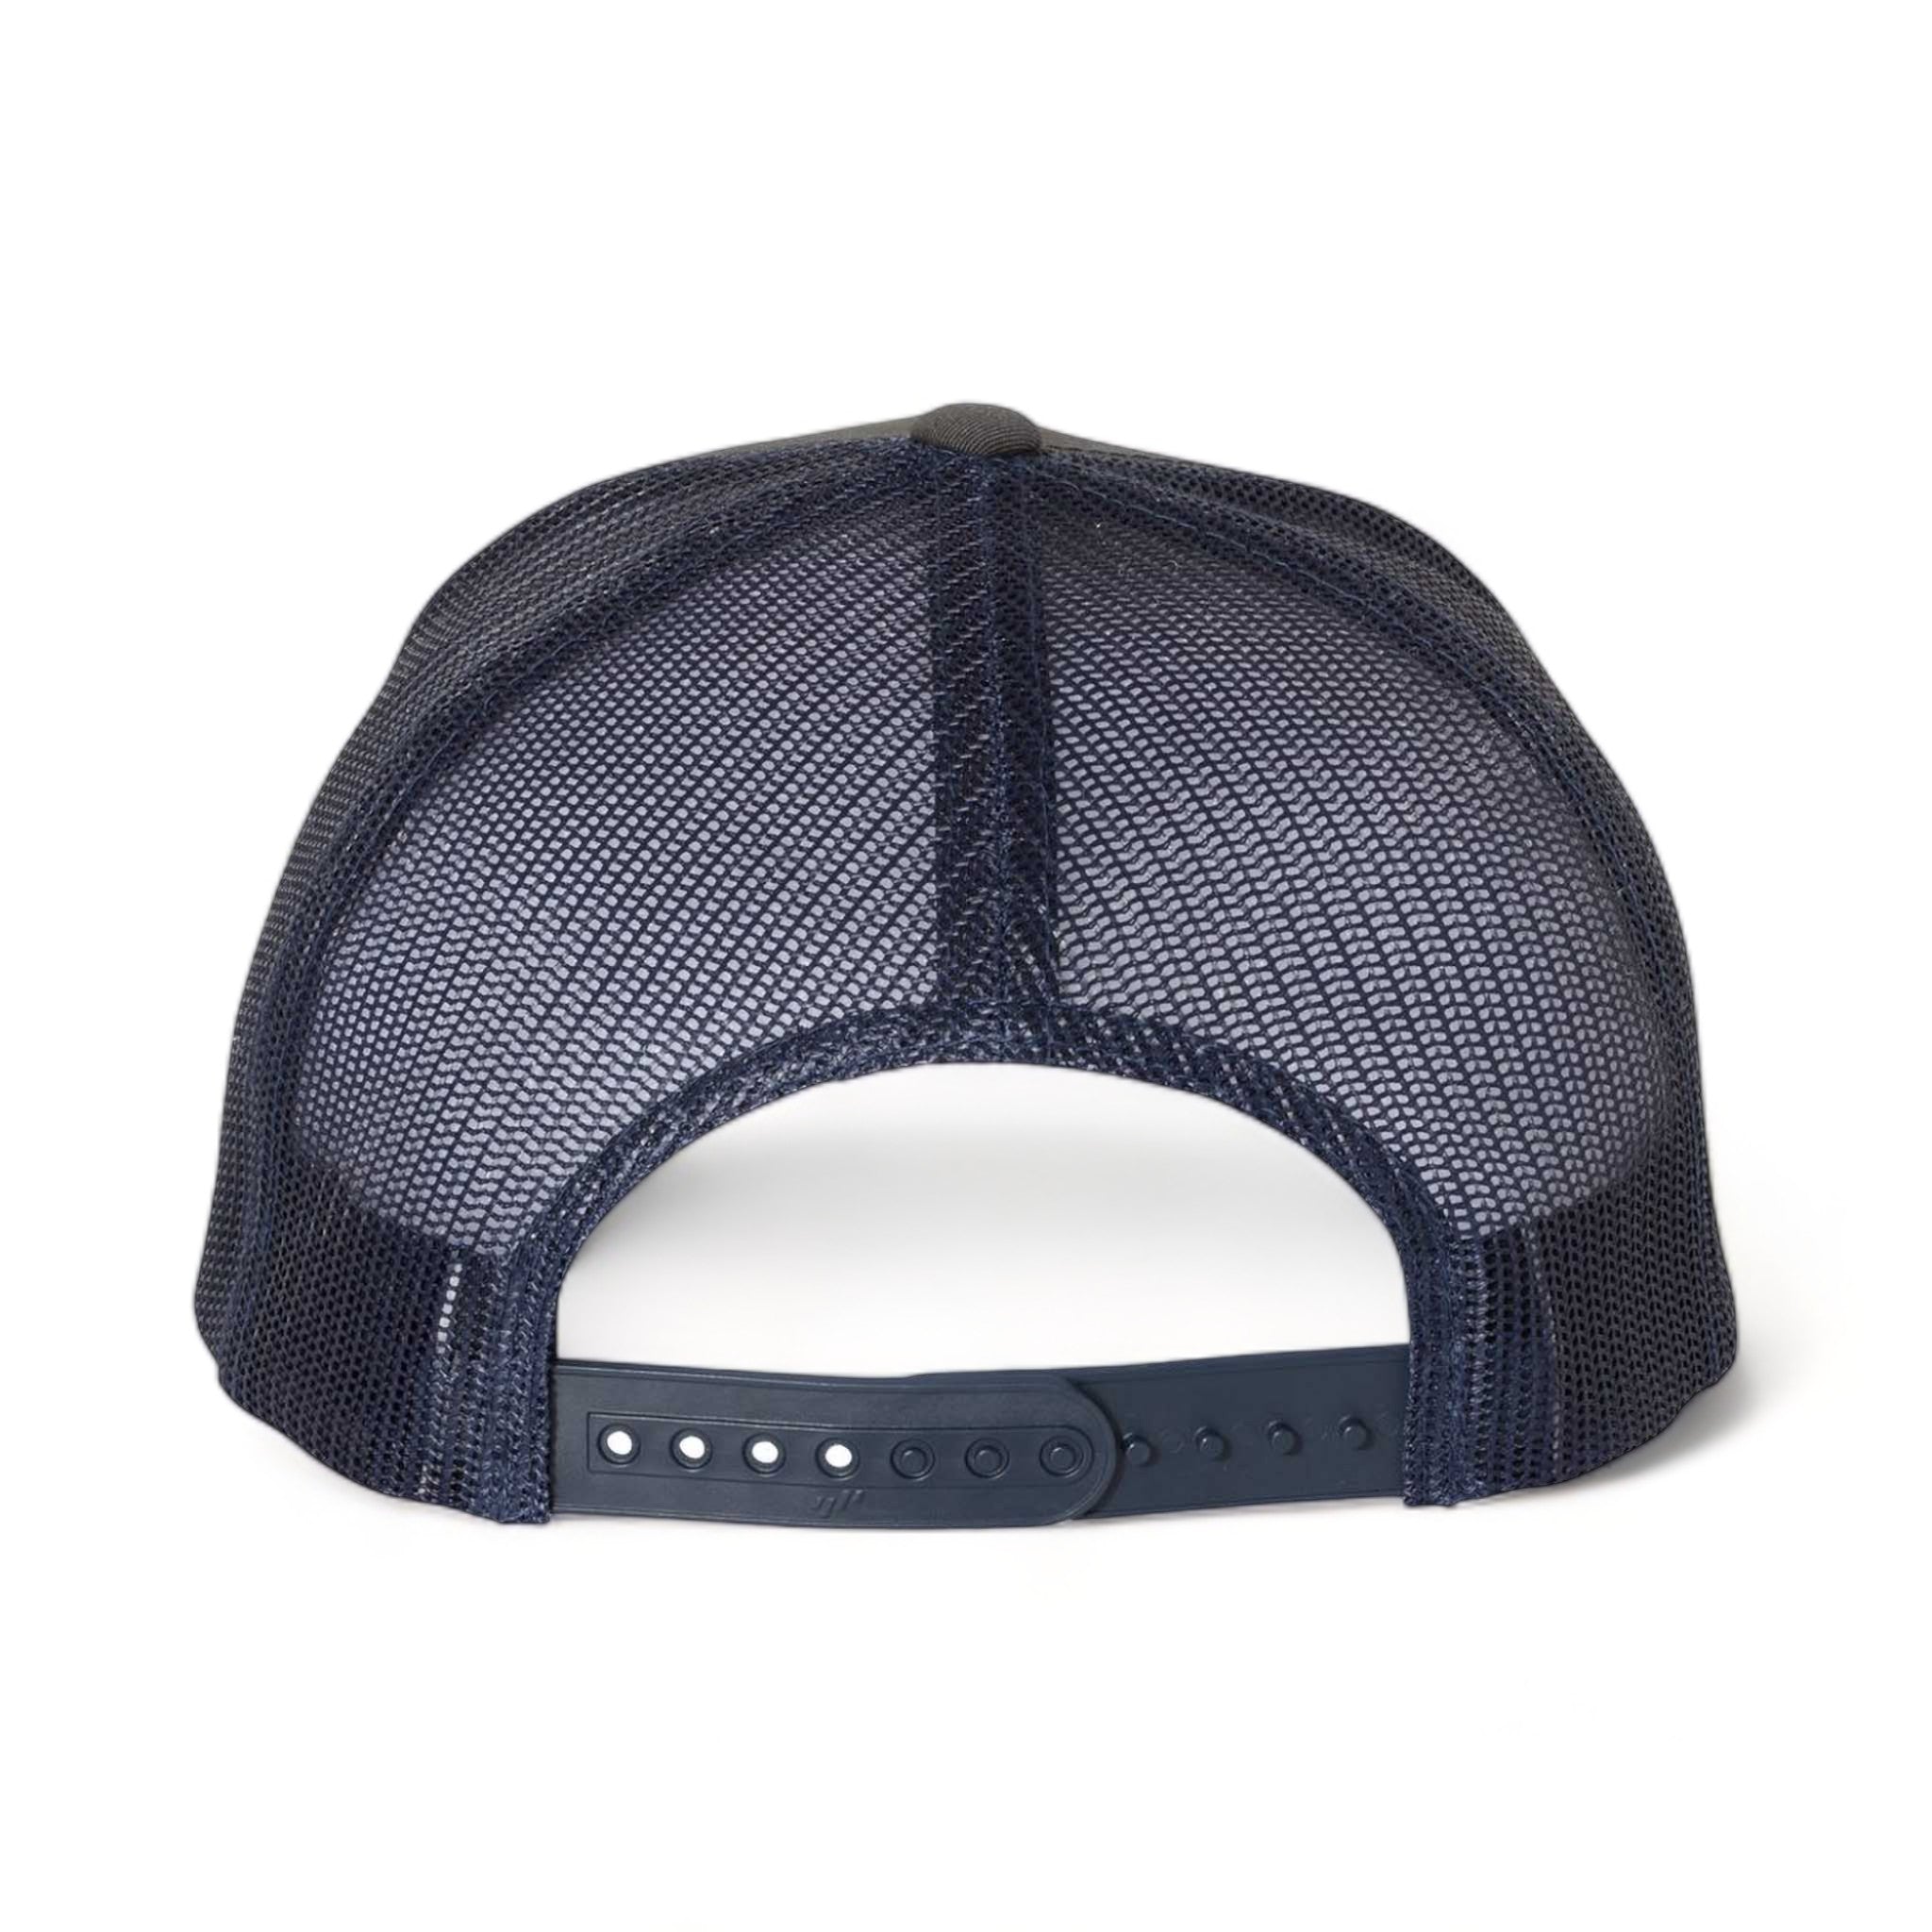 Back view of YP Classics 6606 custom hat in charcoal and navy